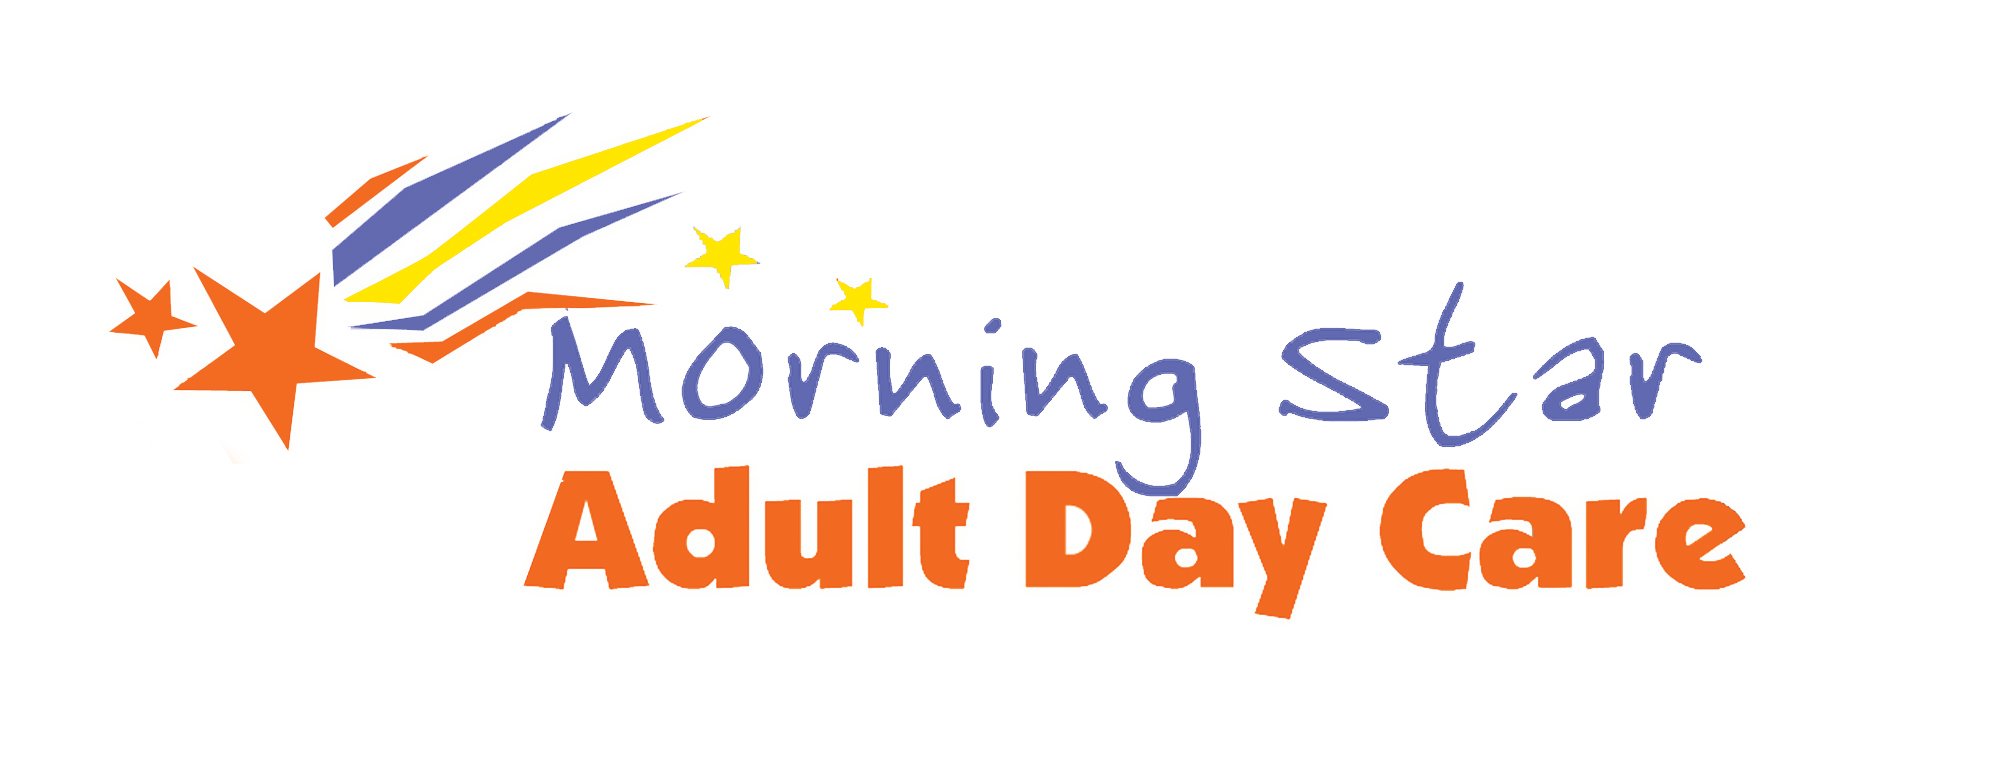 MORNING STAR ADULT DAY CARE